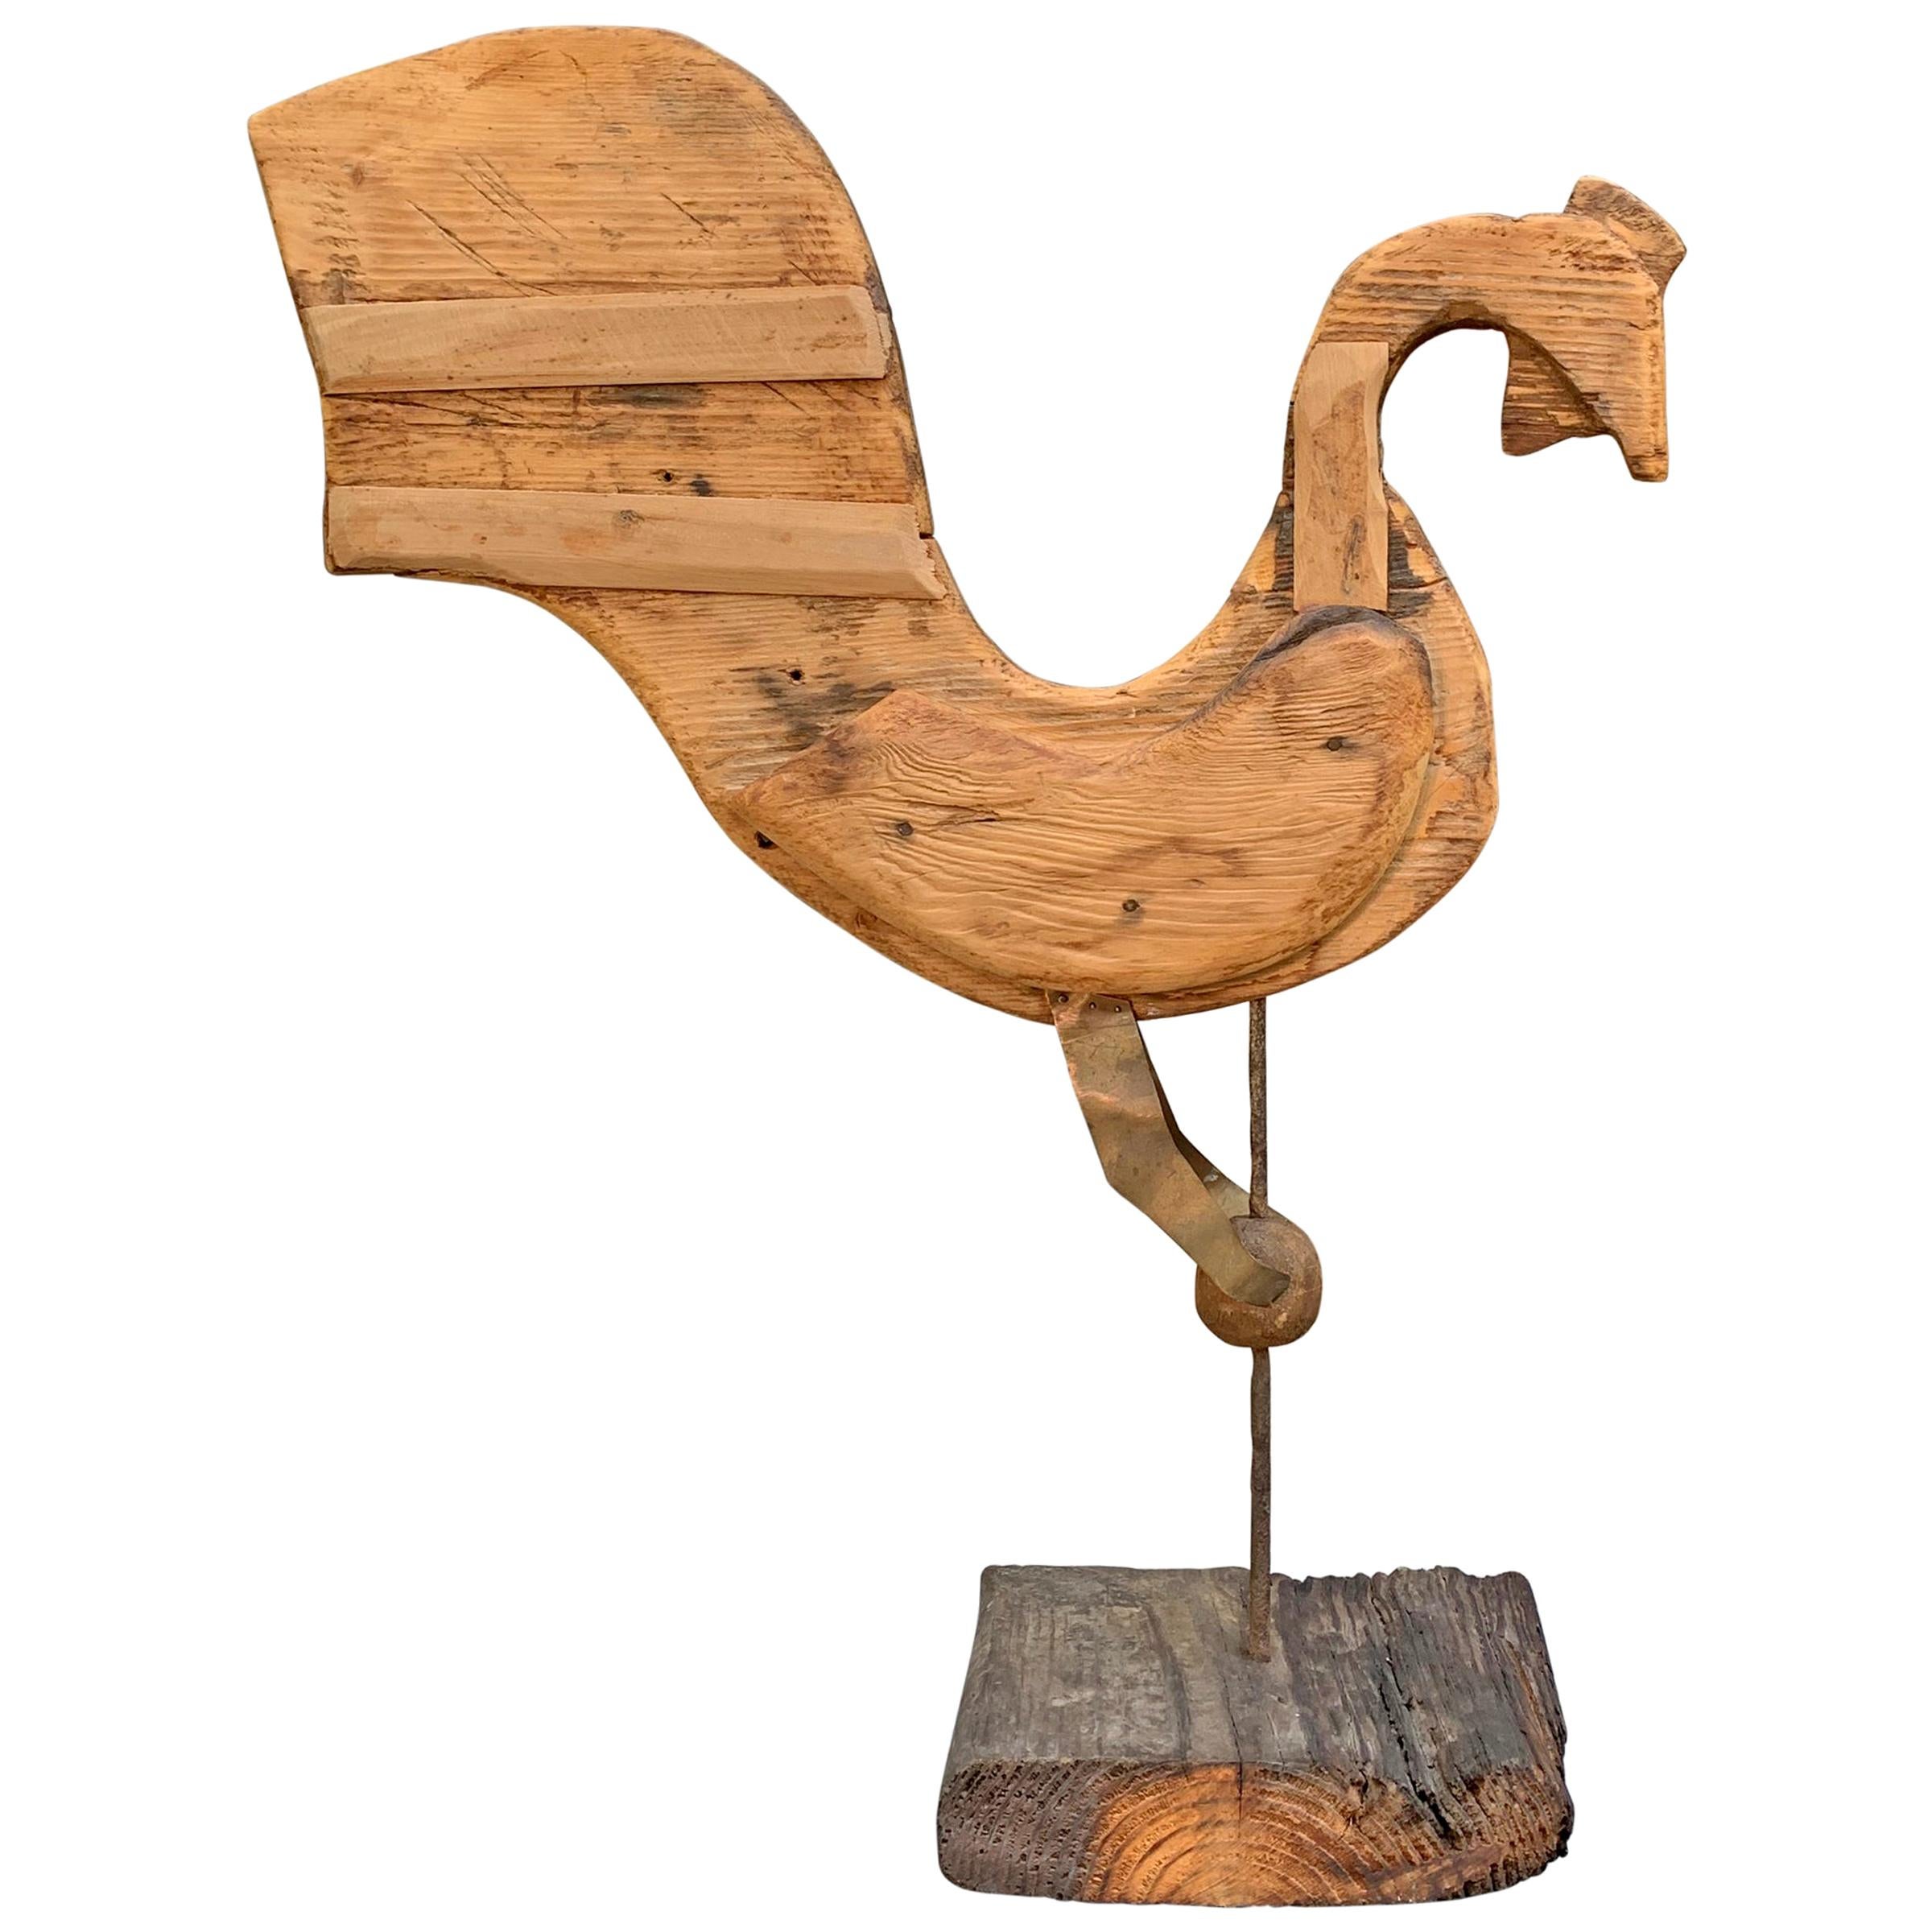 Early 20th Century American Folk Art Rooster Weathervane